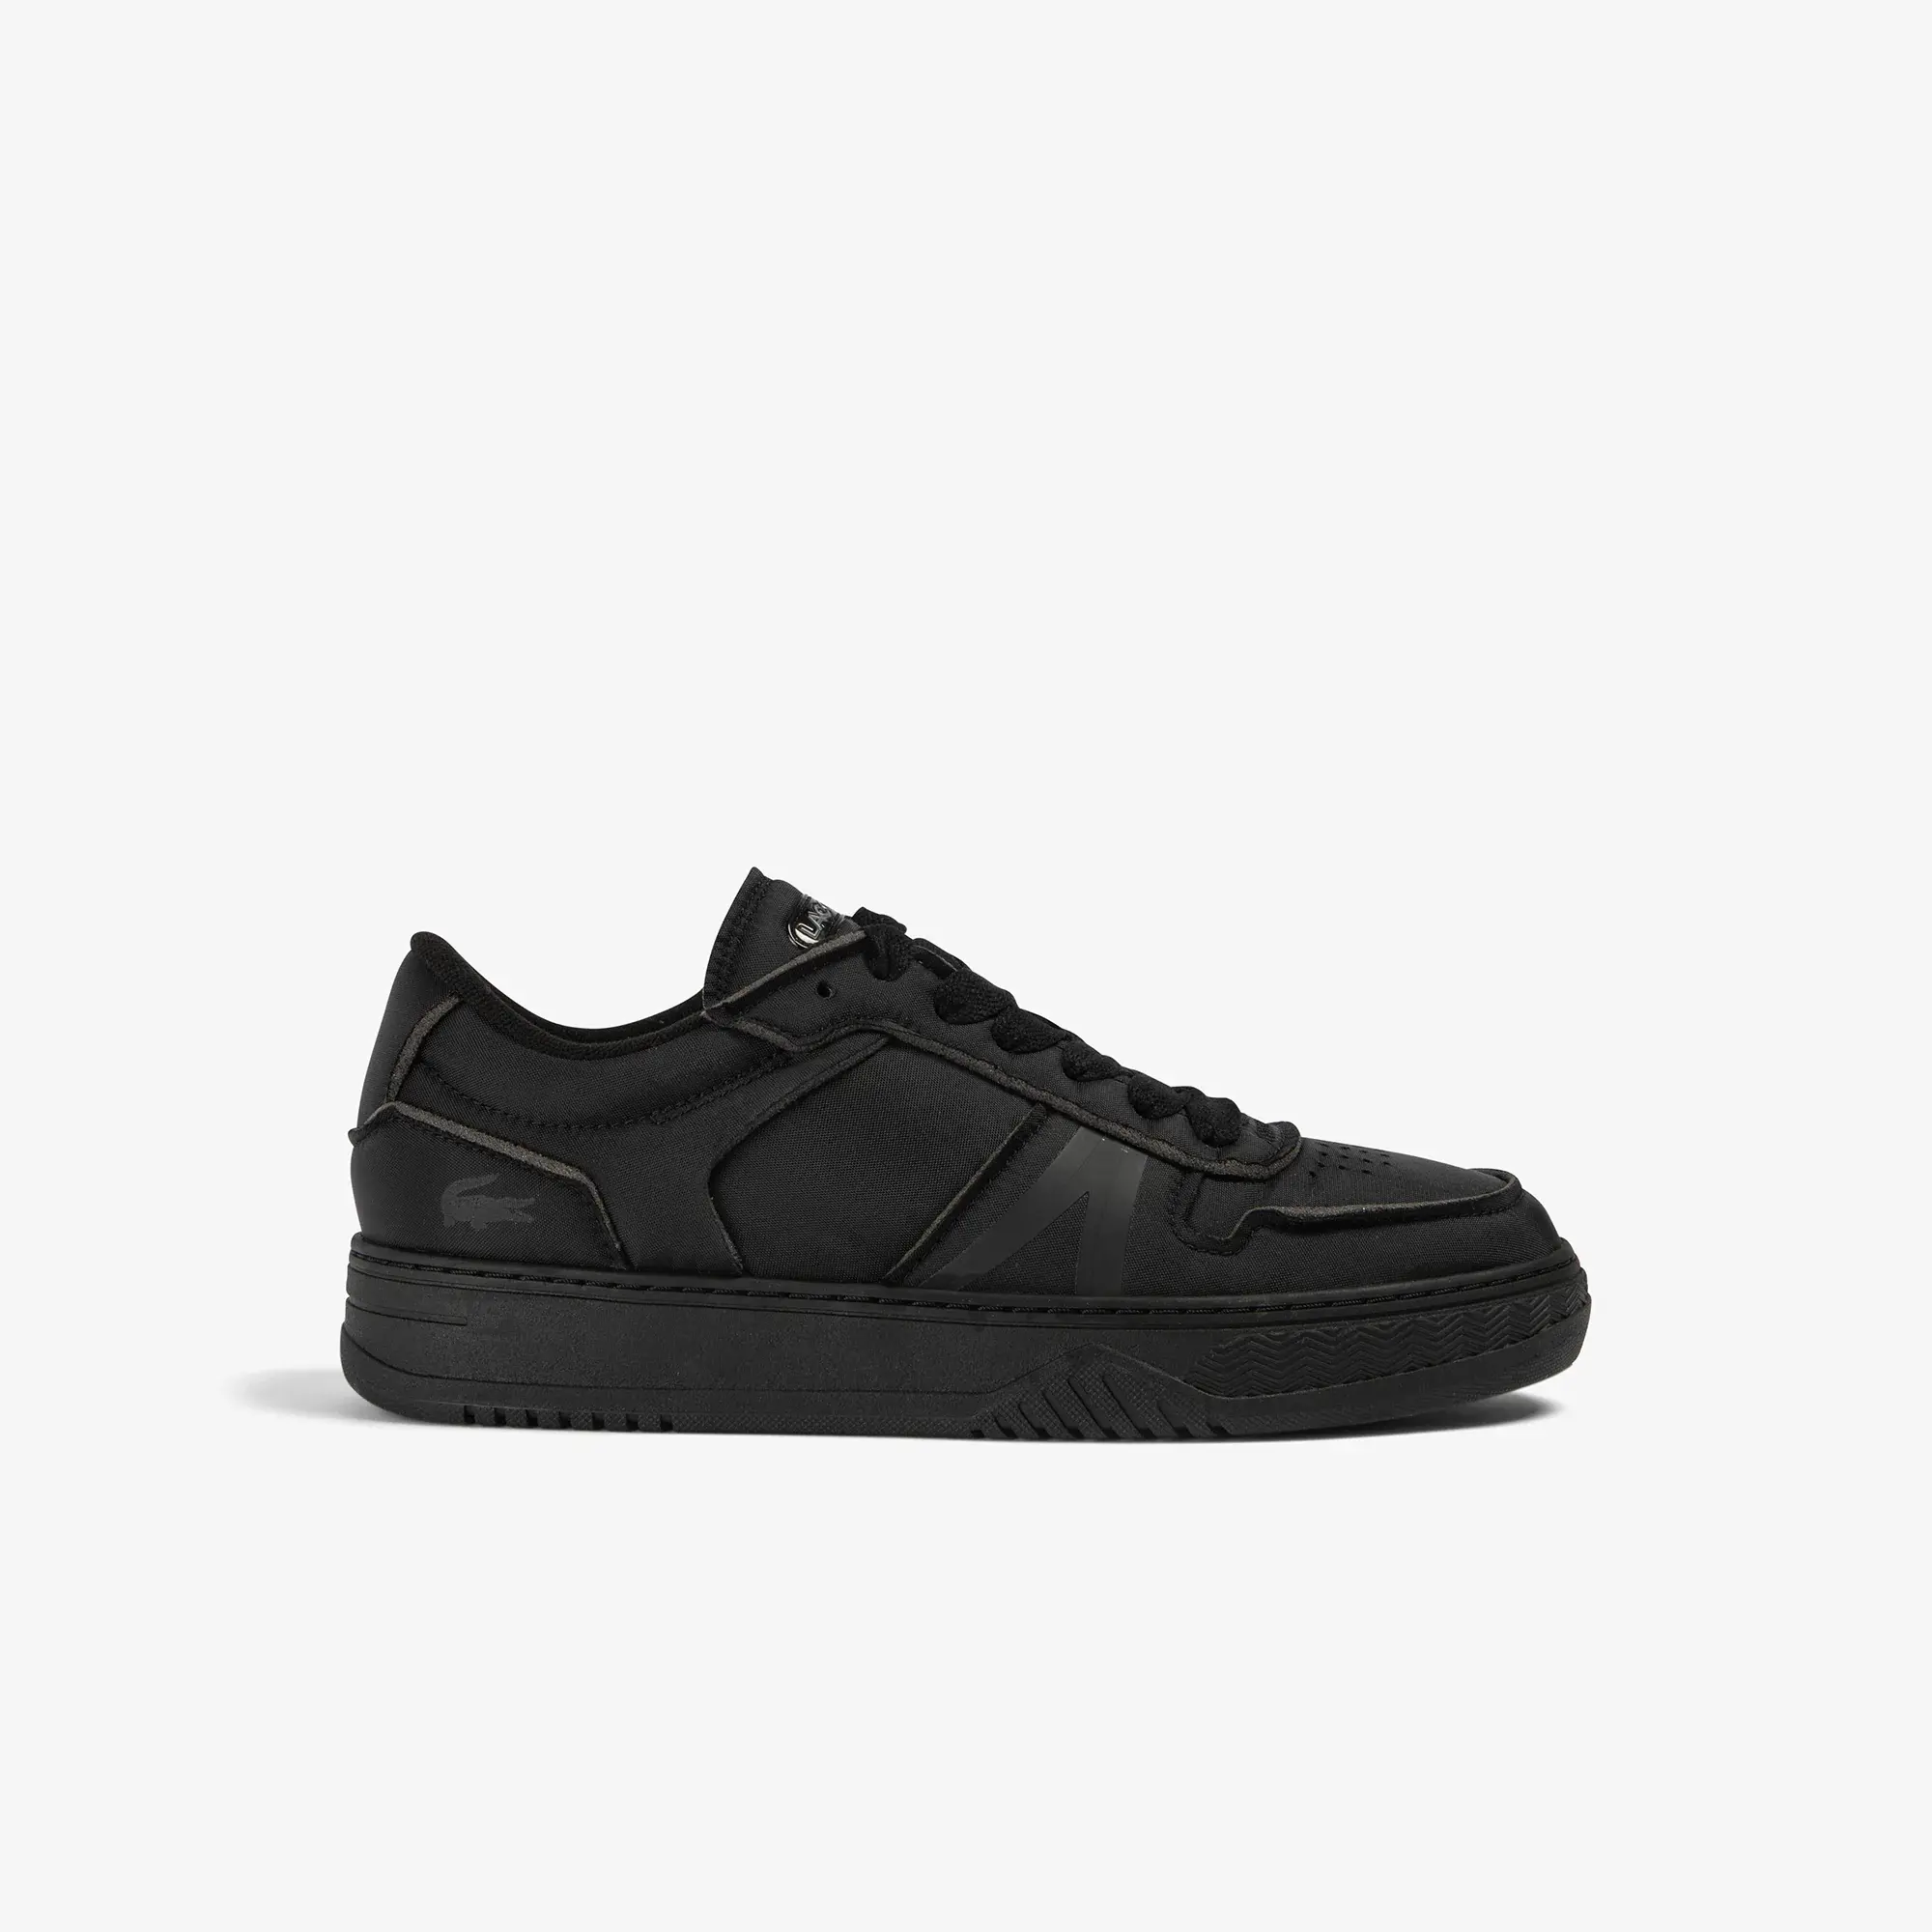 Lacoste Men's L001 Crafted Sneakers. 1